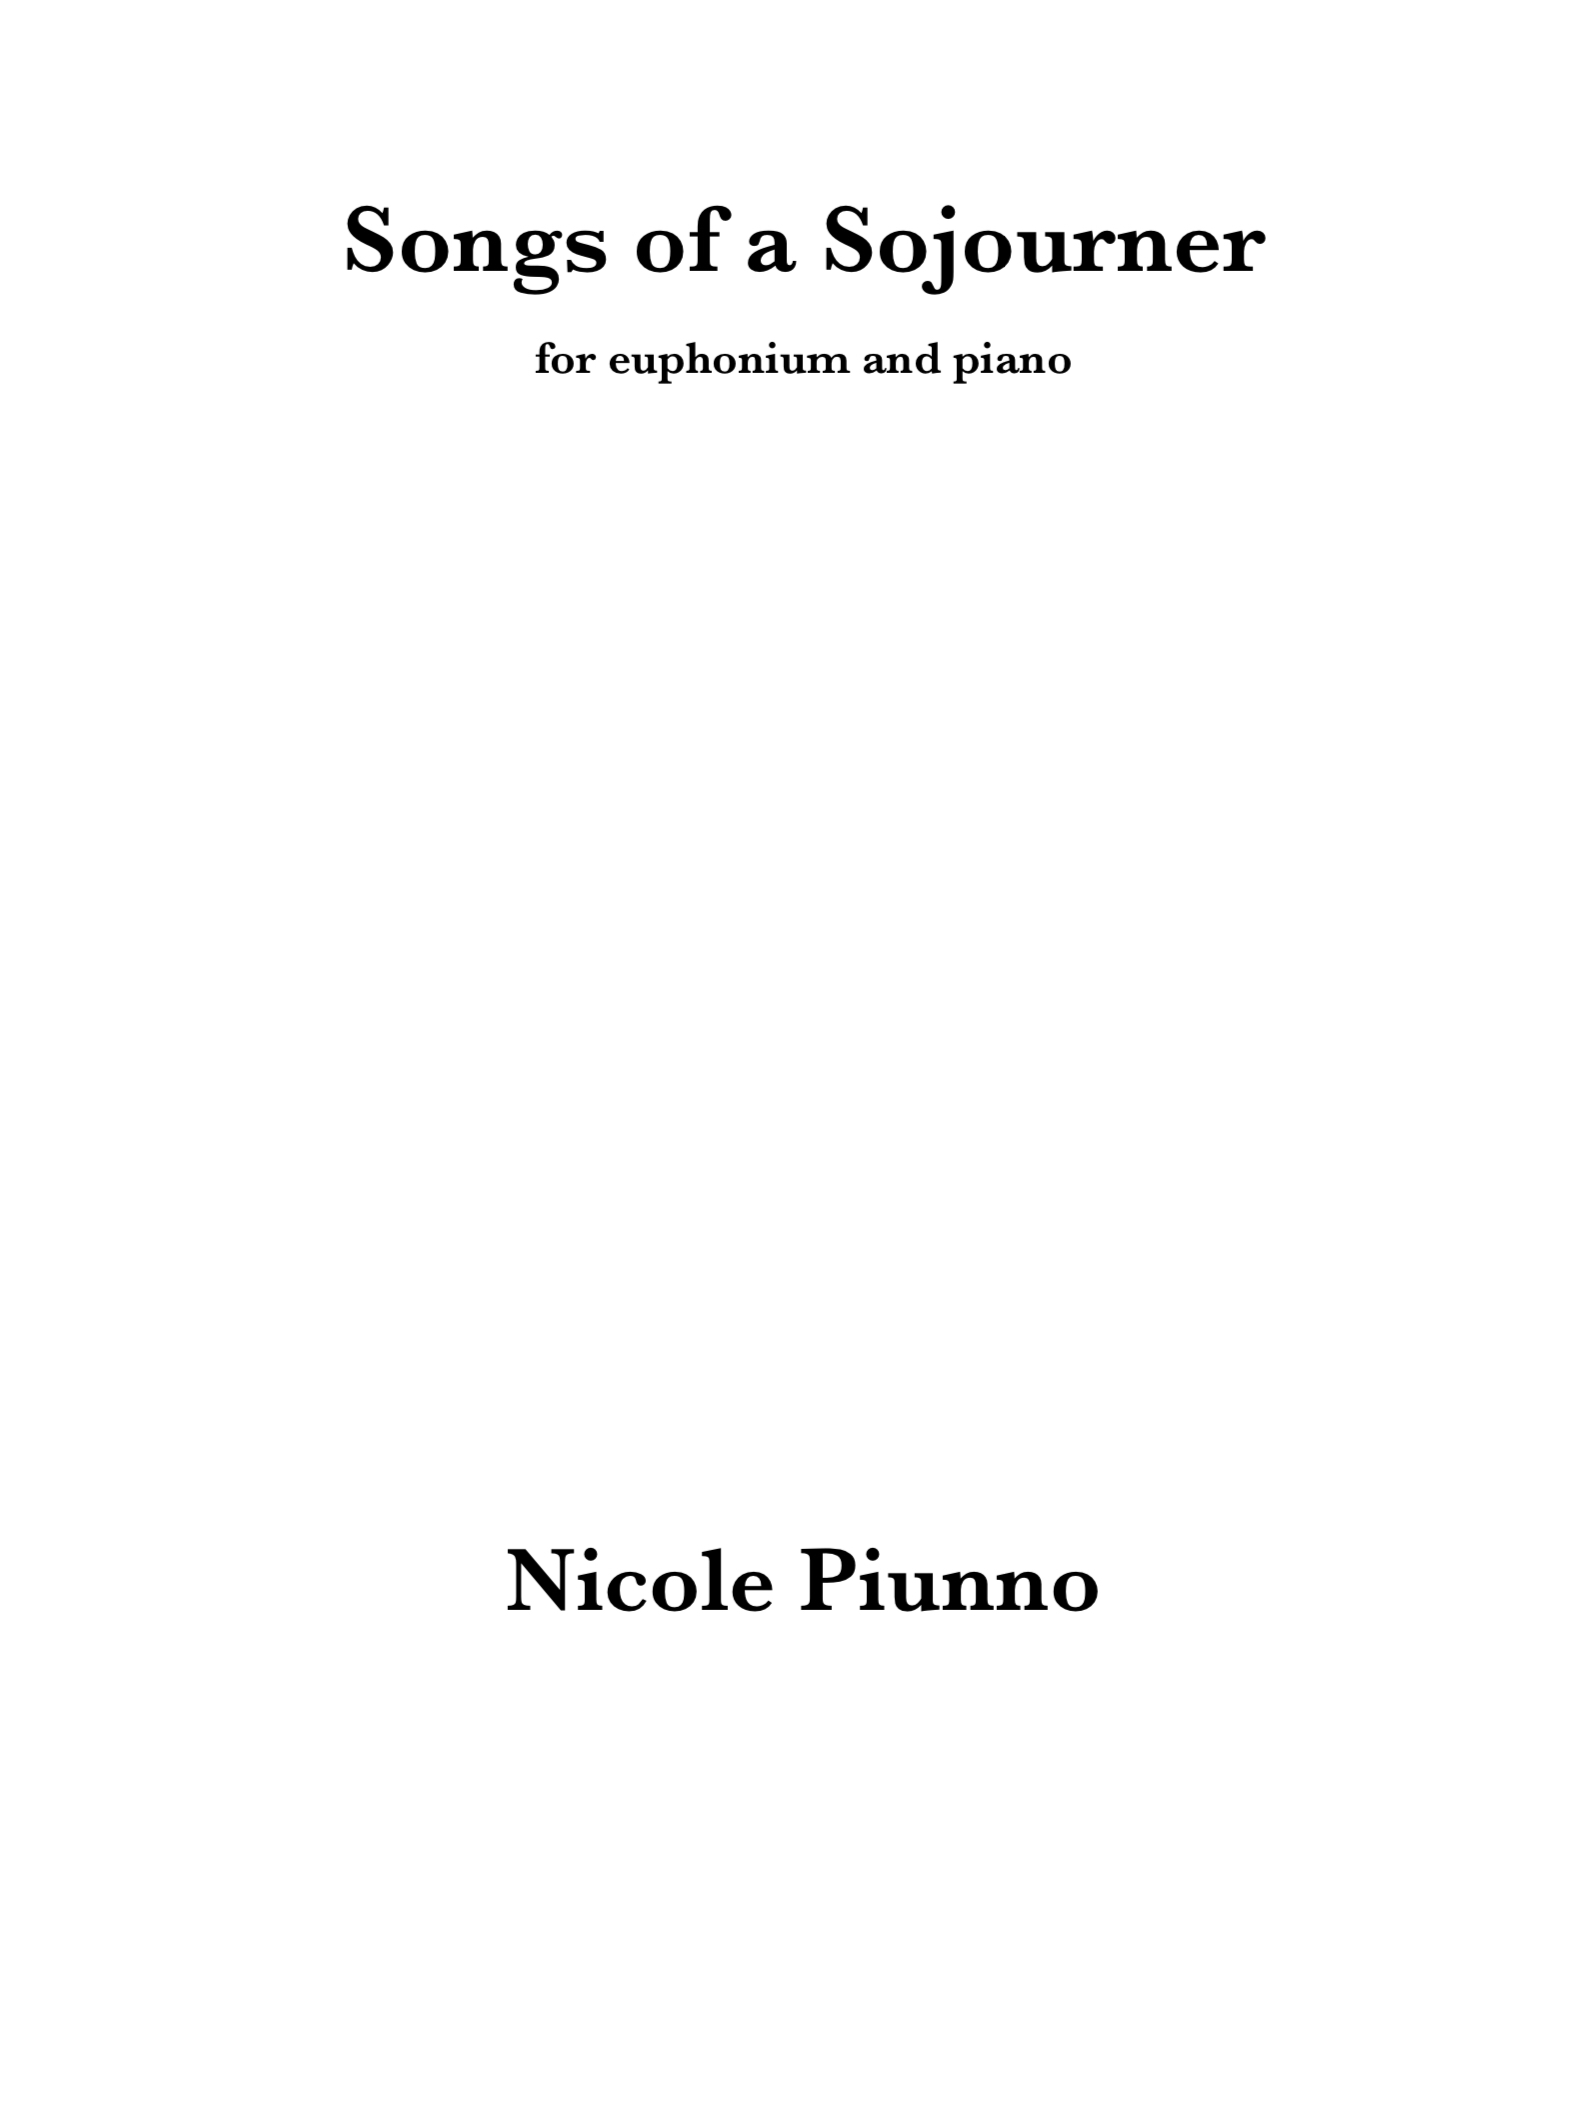 Songs Of A Sojourner by Nicole Piunno